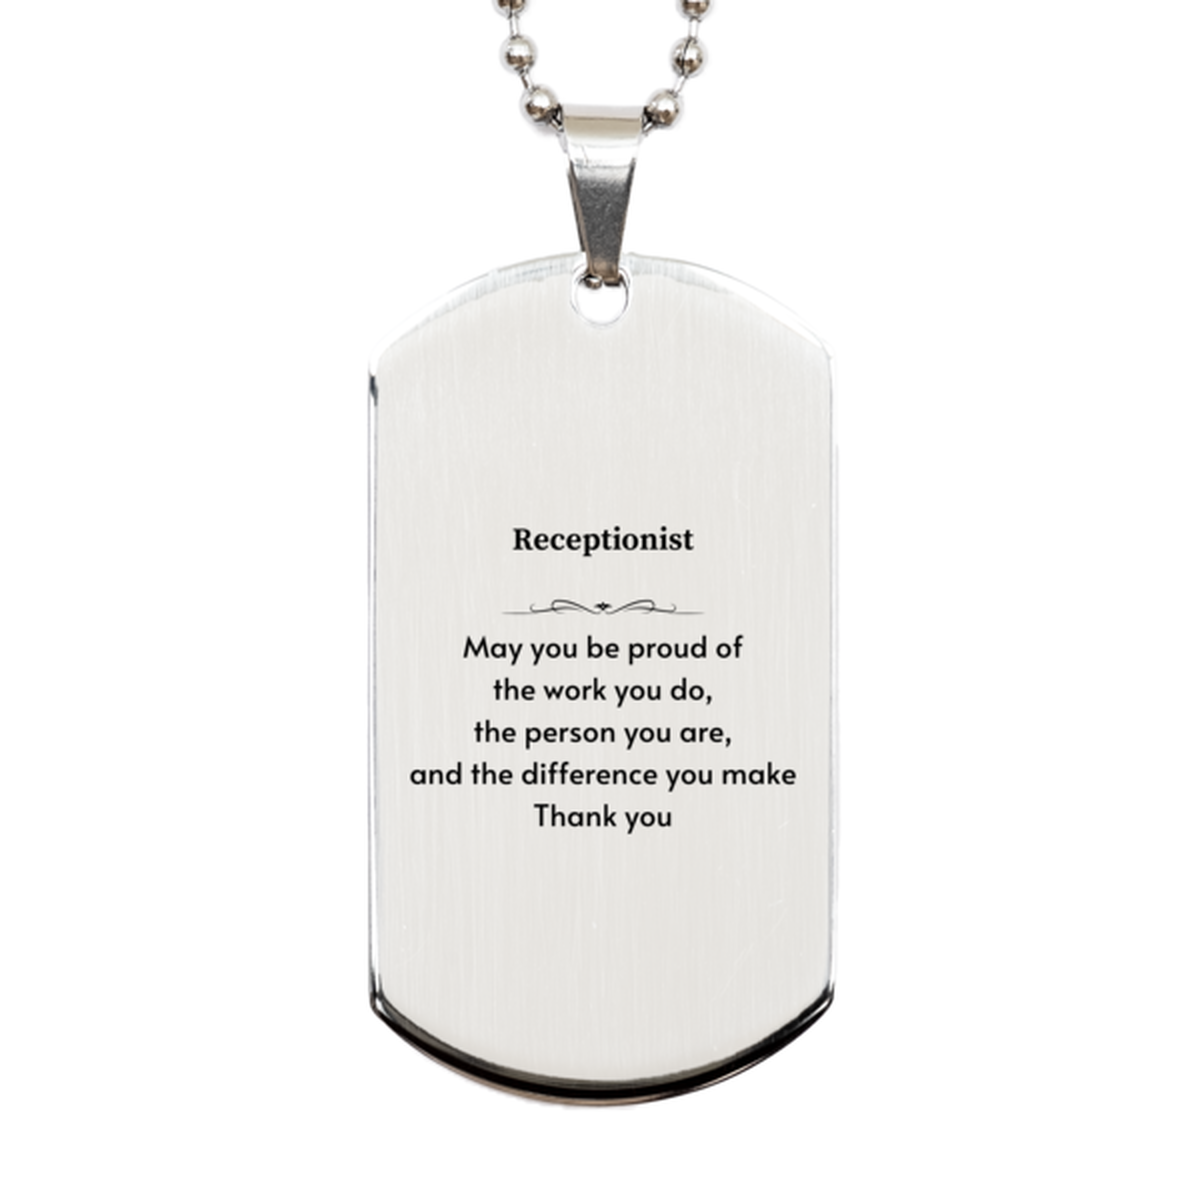 Heartwarming Silver Dog Tag Retirement Coworkers Gifts for Receptionist, Receptionist May You be proud of the work you do, the person you are Gifts for Boss Men Women Friends